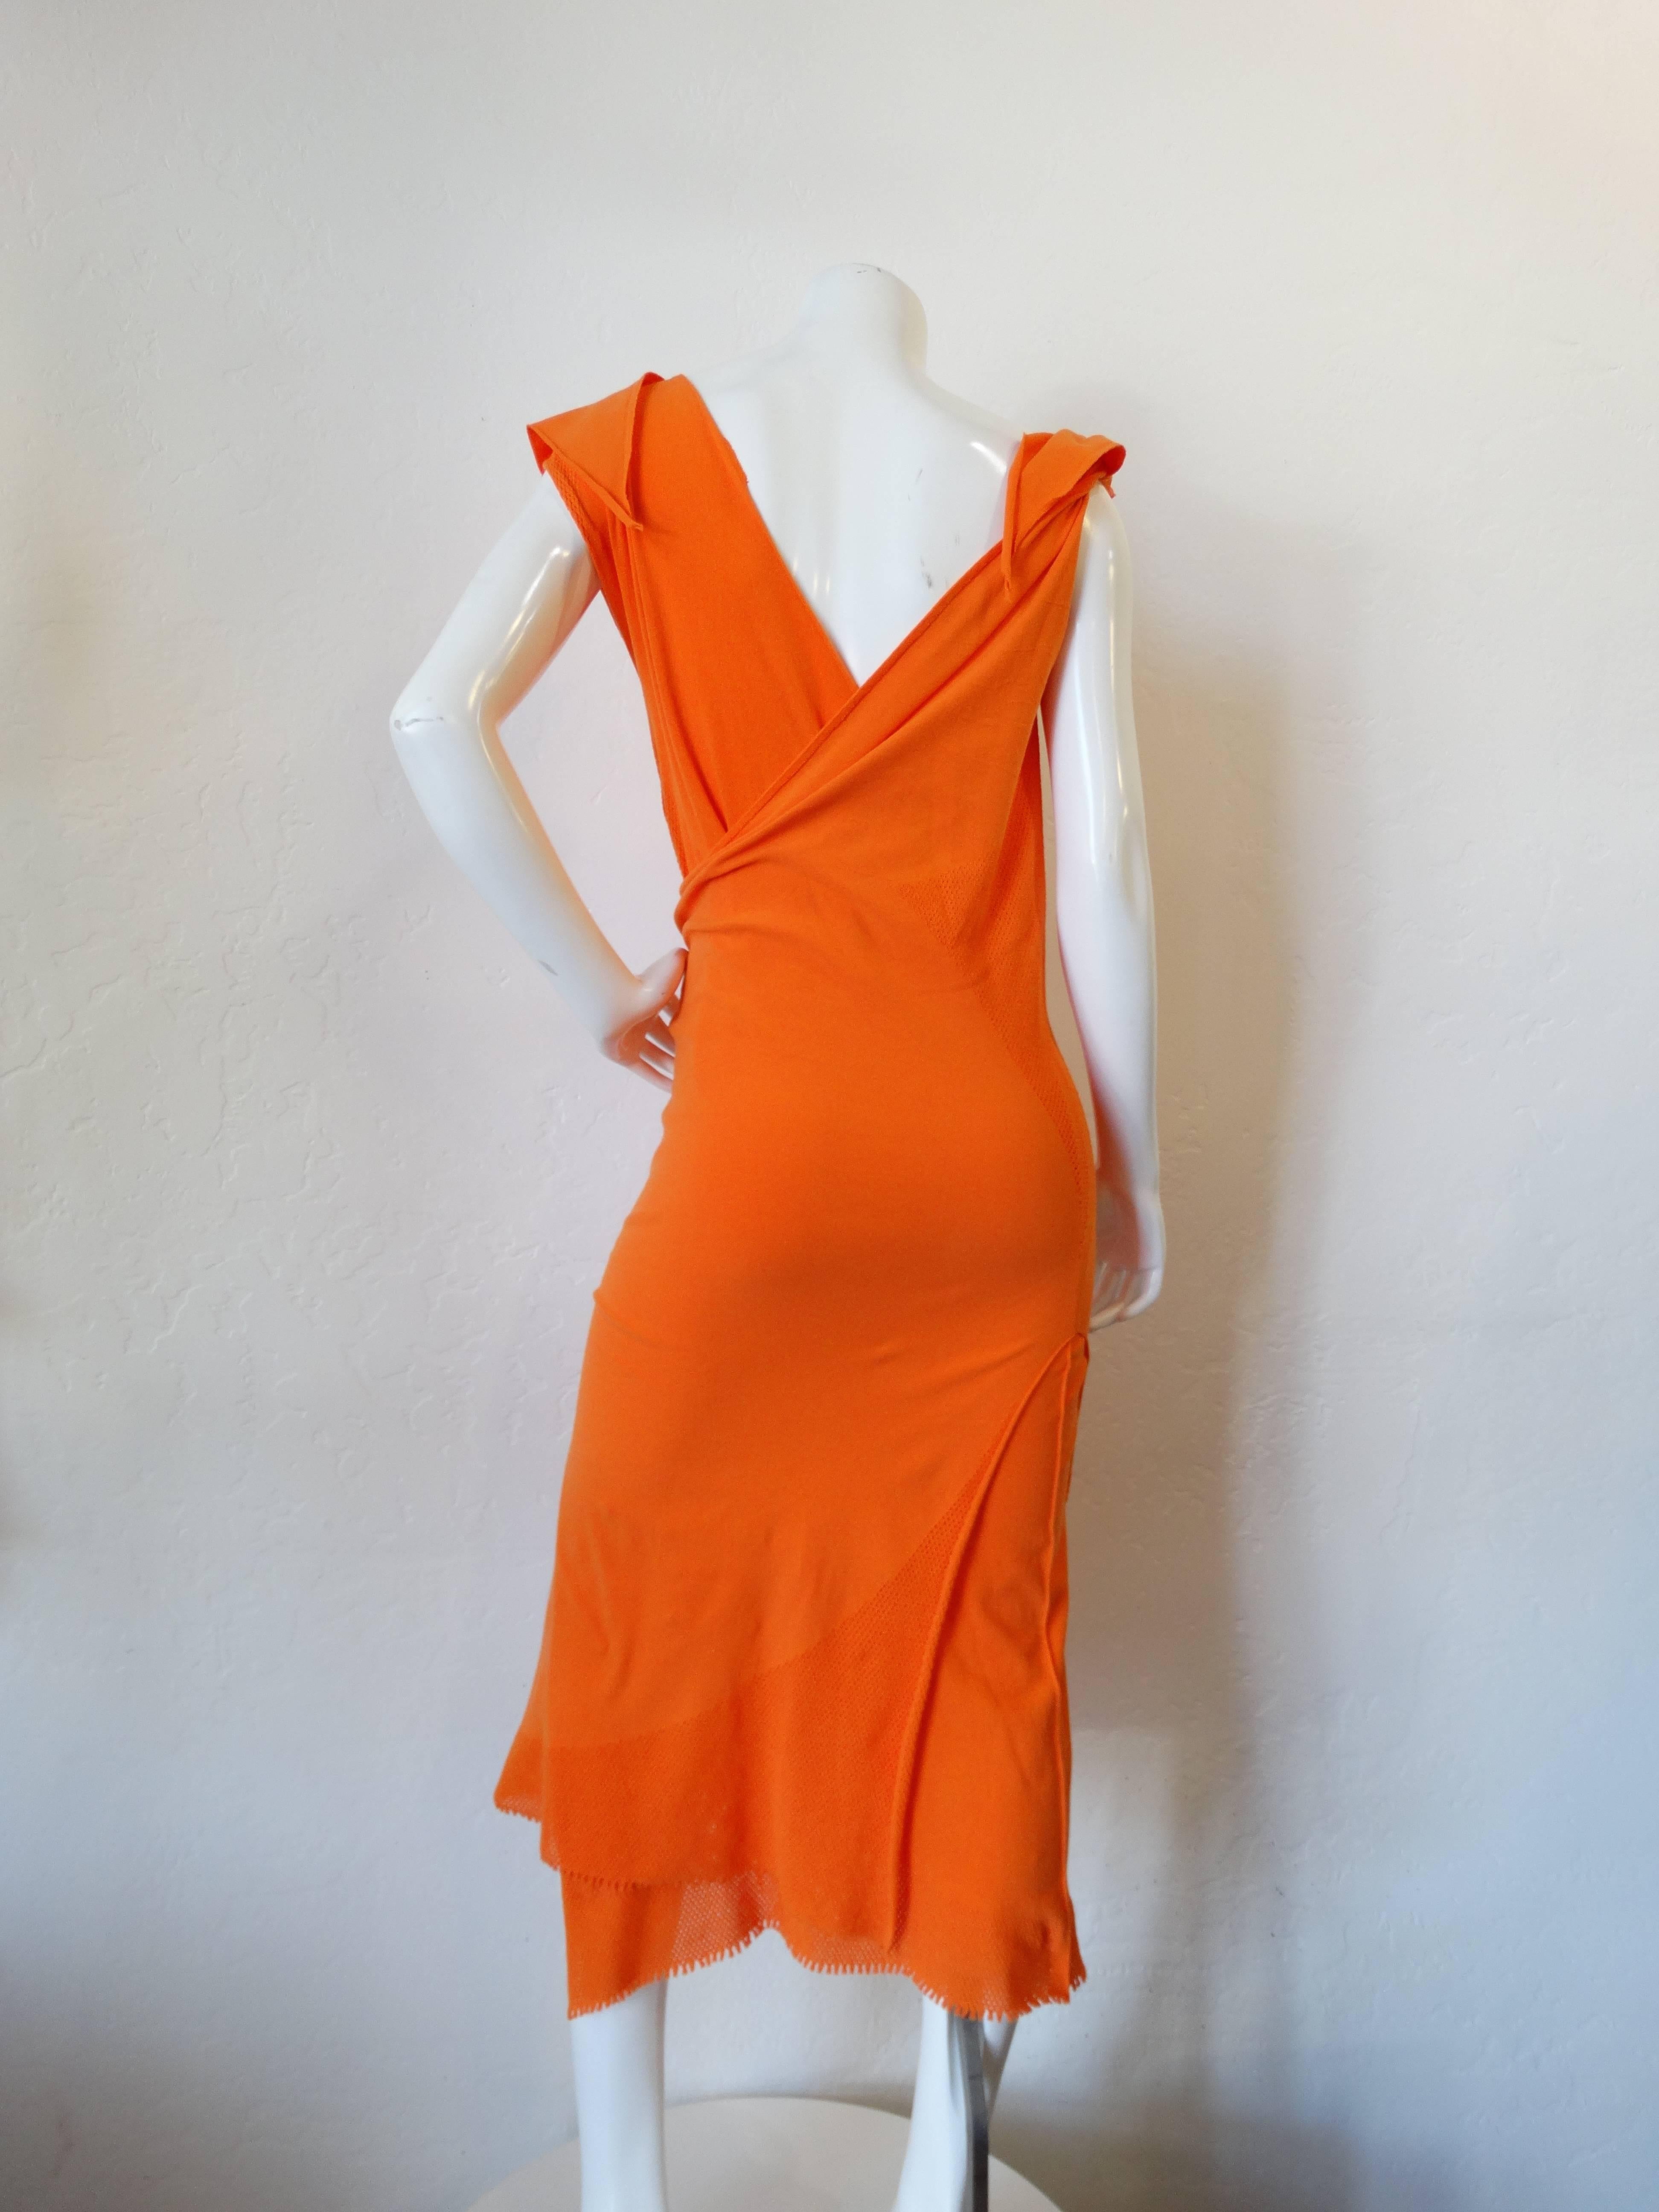 Documented 2005 A-POC by Issey Miyake & Dai Fujiwara 2-Piece Orange Dress Set In Excellent Condition For Sale In Scottsdale, AZ